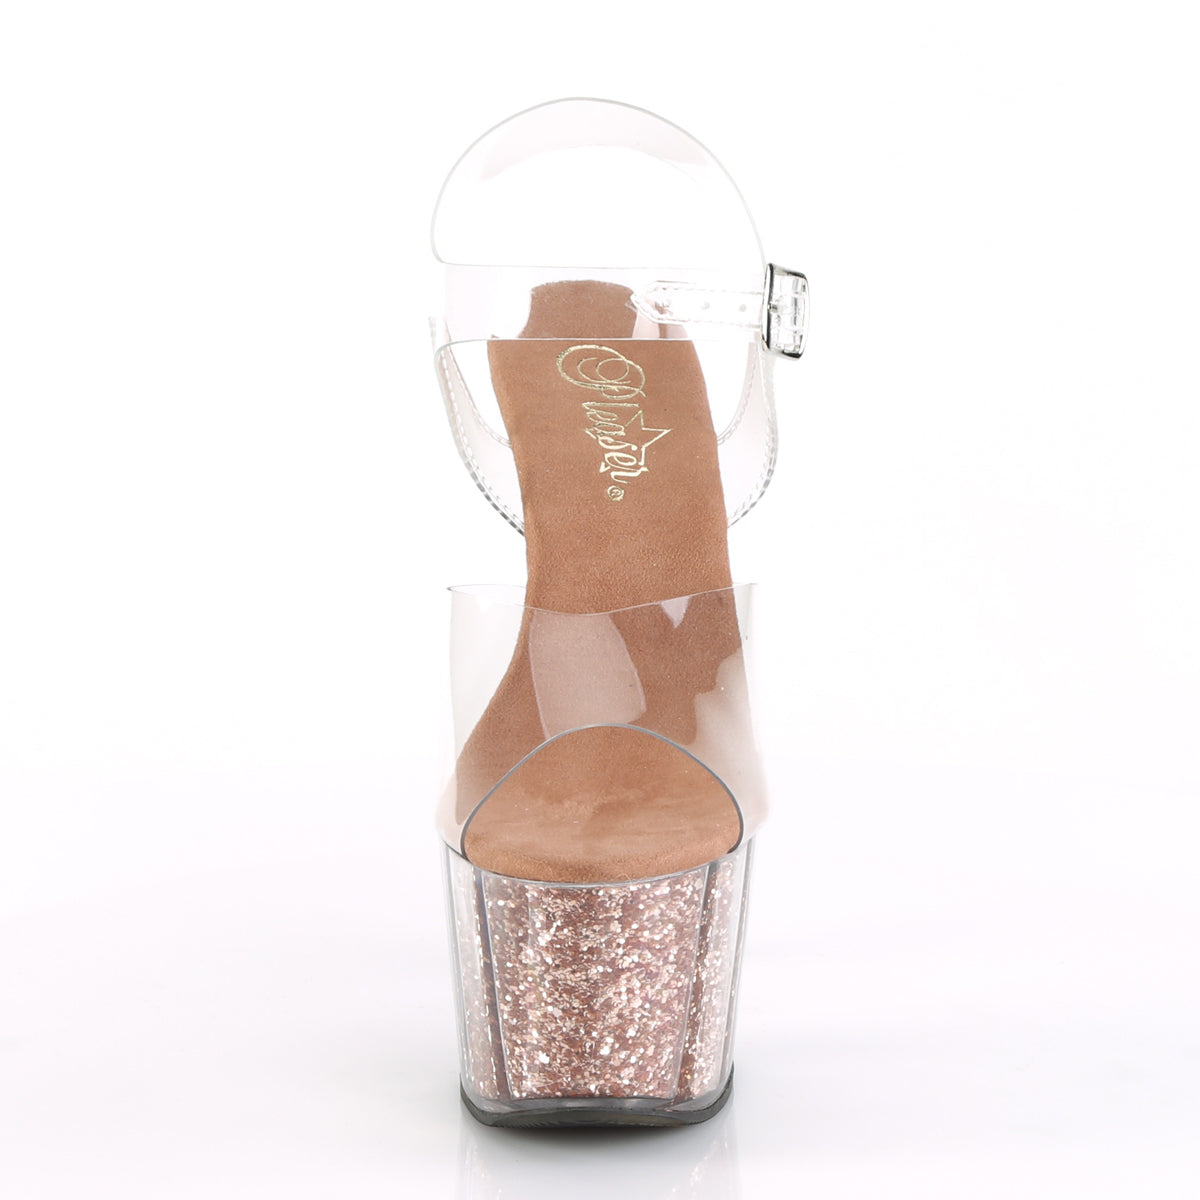 ADORE-708G Pleaser Clear/Rose Gold Glitter Inserts Platform Shoes [Exotic Dance Shoes]